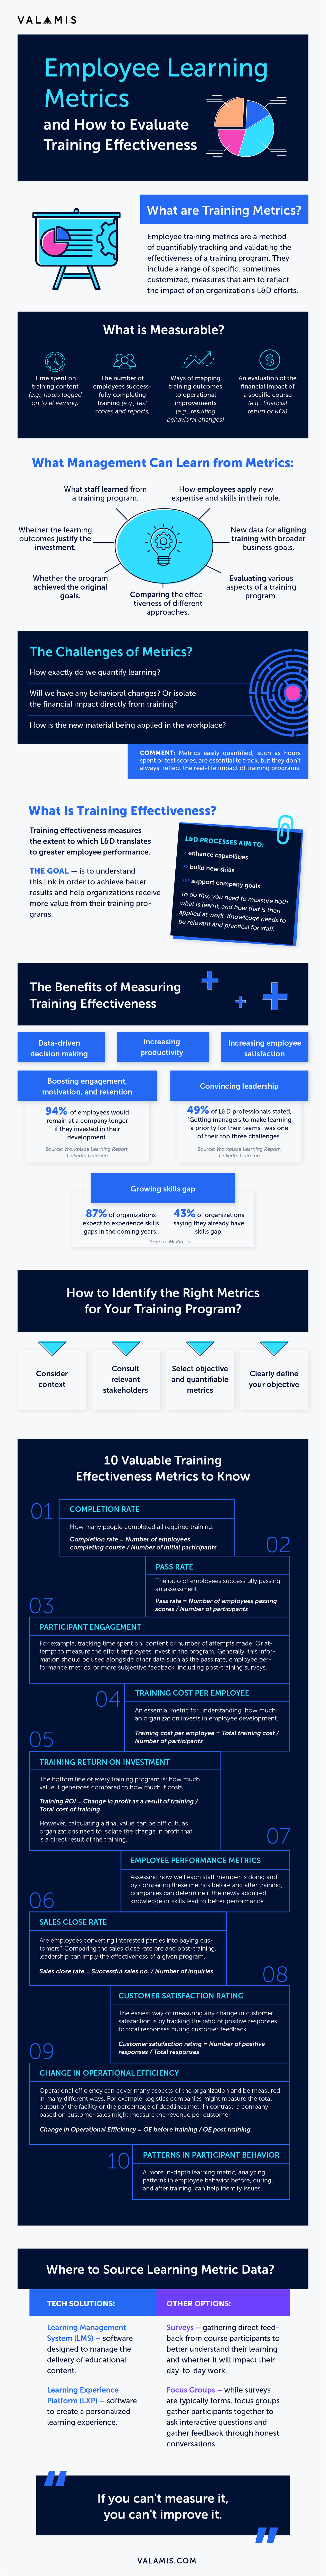 Infographic: Training and Learning Metrics